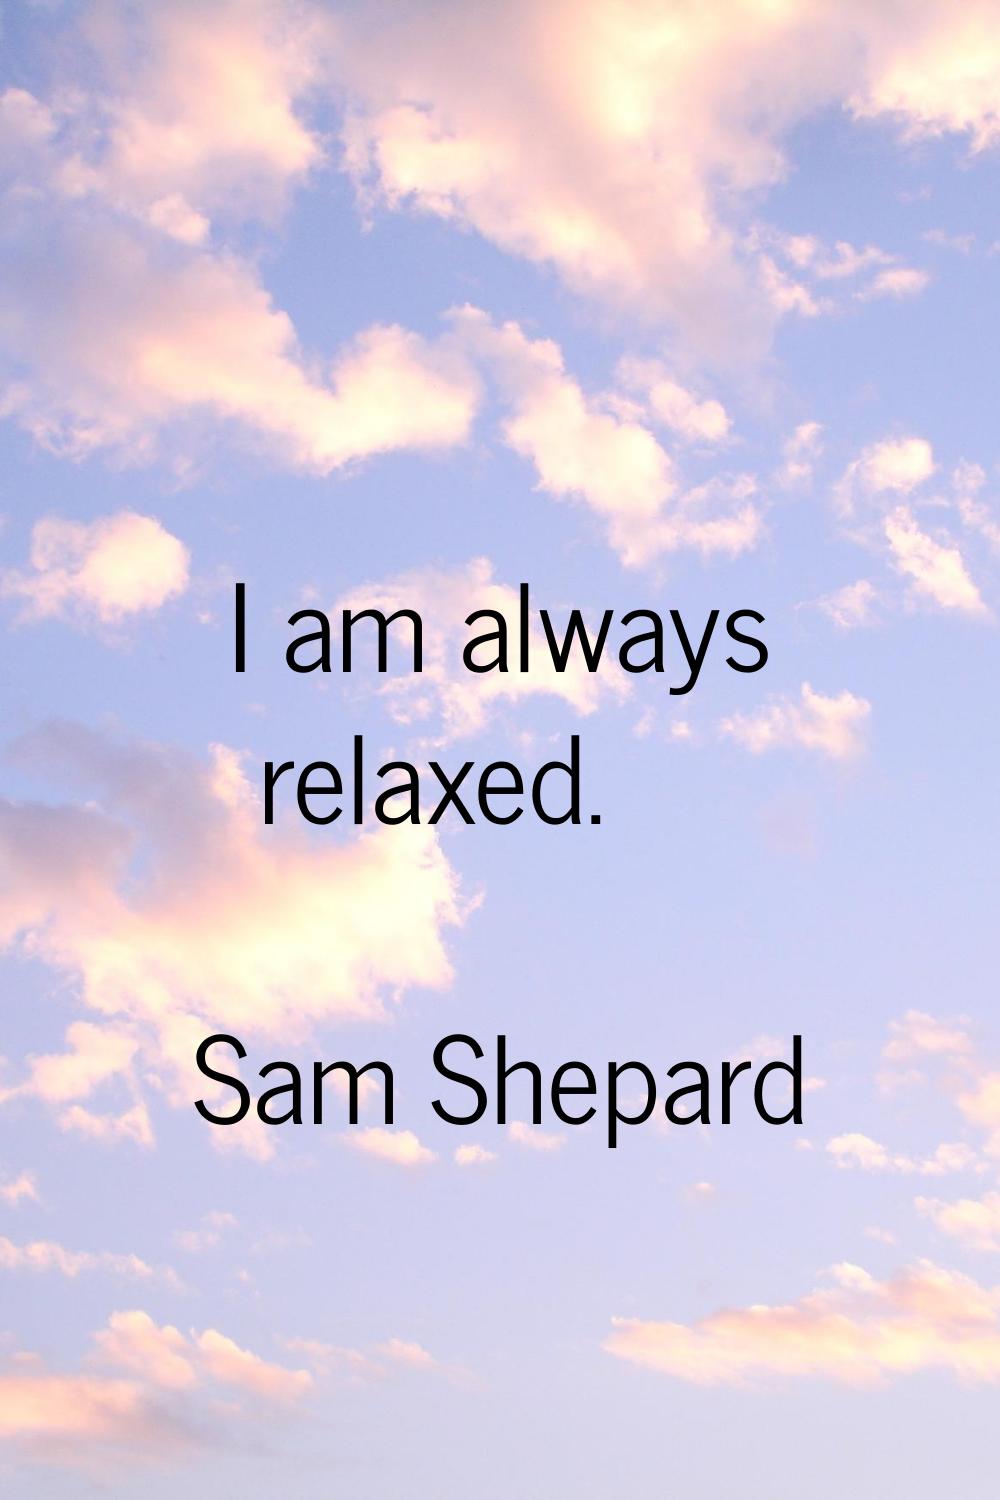 I am always relaxed.